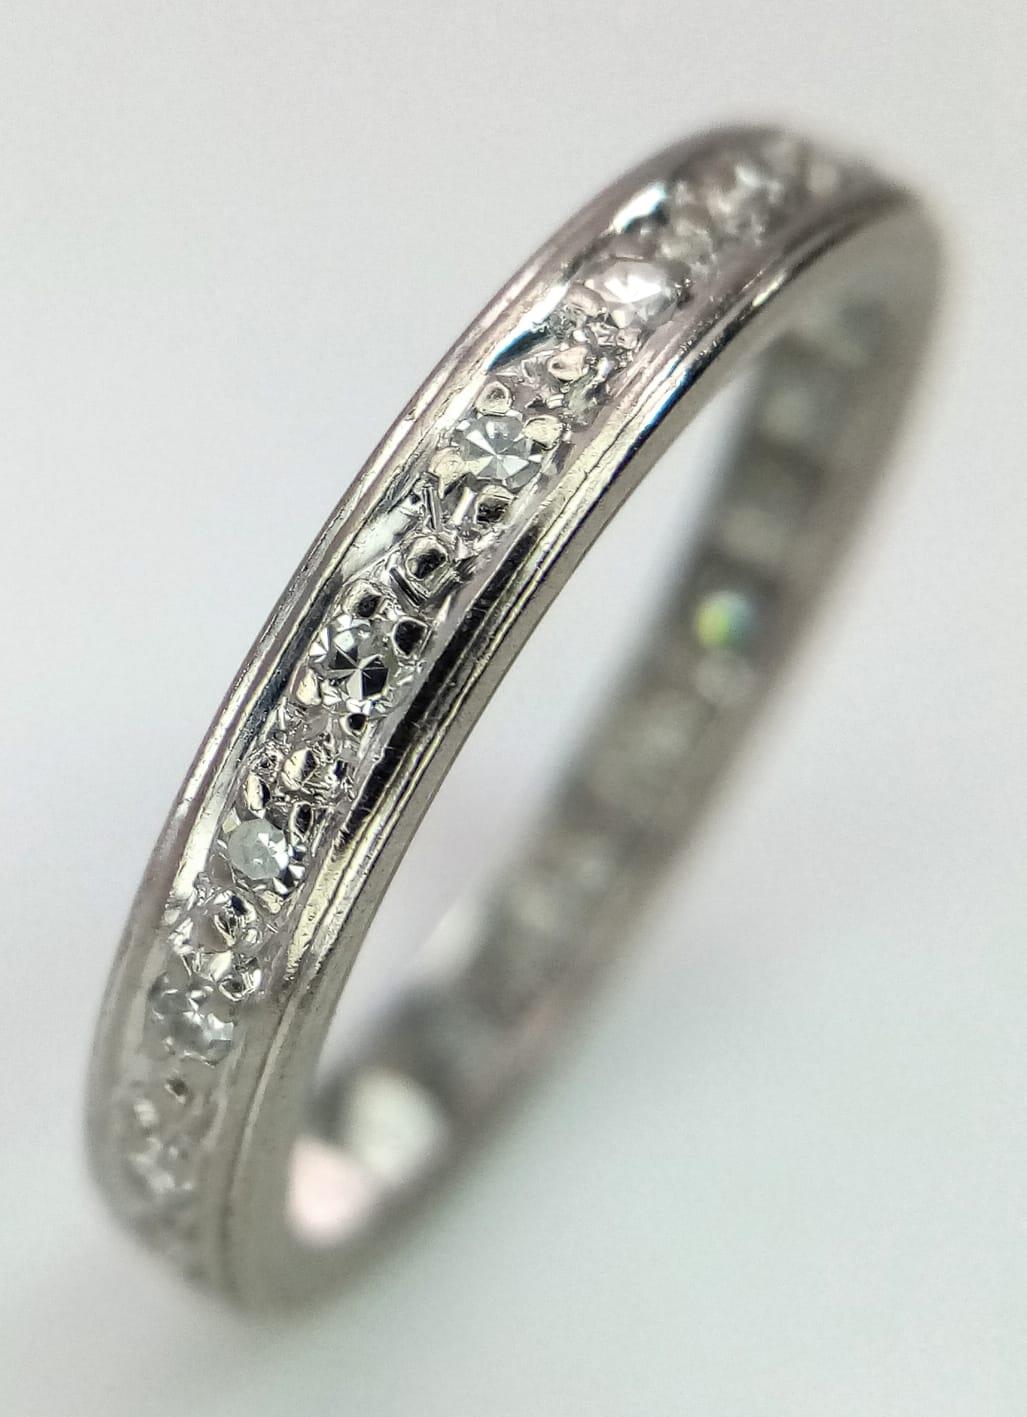 A VINTAGE 18K WHITE GOLD DIAMOND FULL ETERNITY RING. Size L/M, 2.9g total weight.